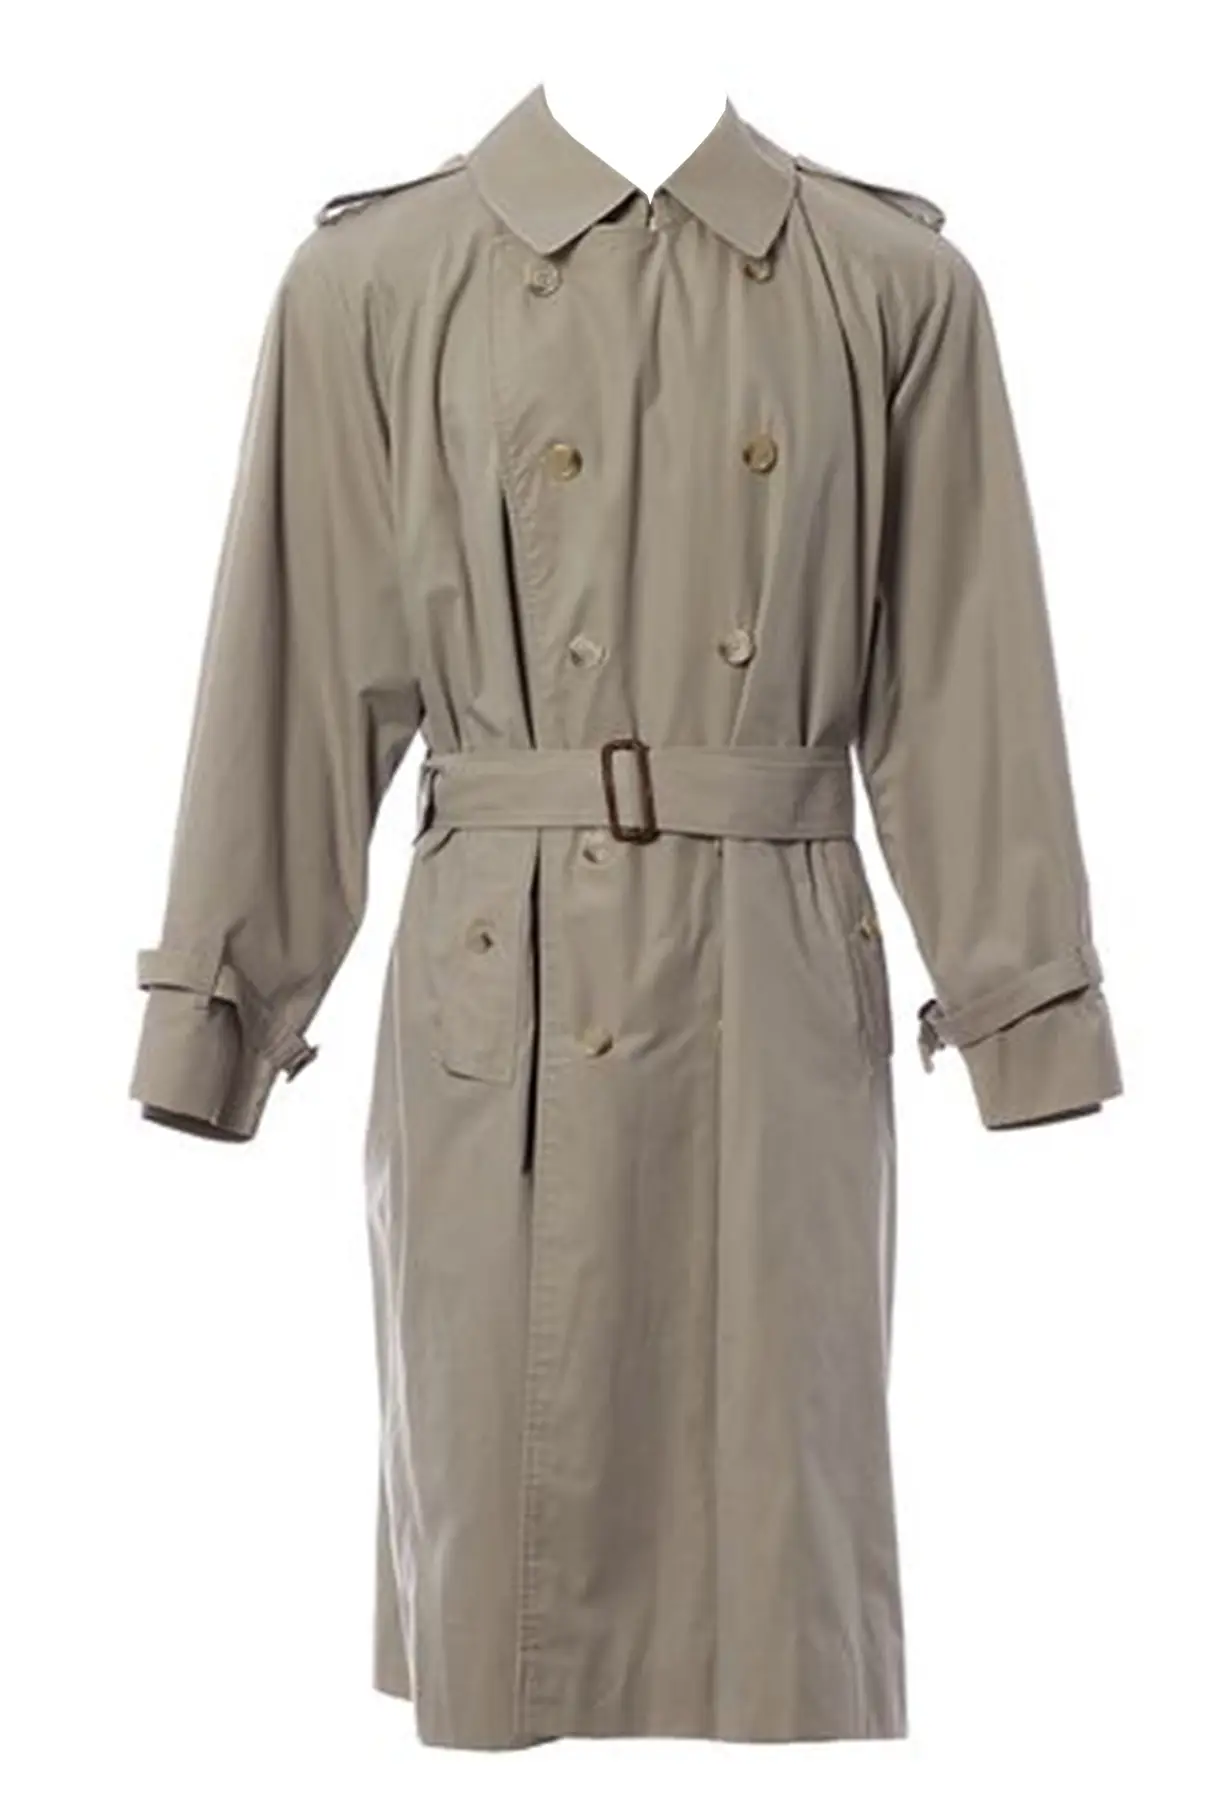 burberry-beige-cotton-trench-belted-coat.jpg